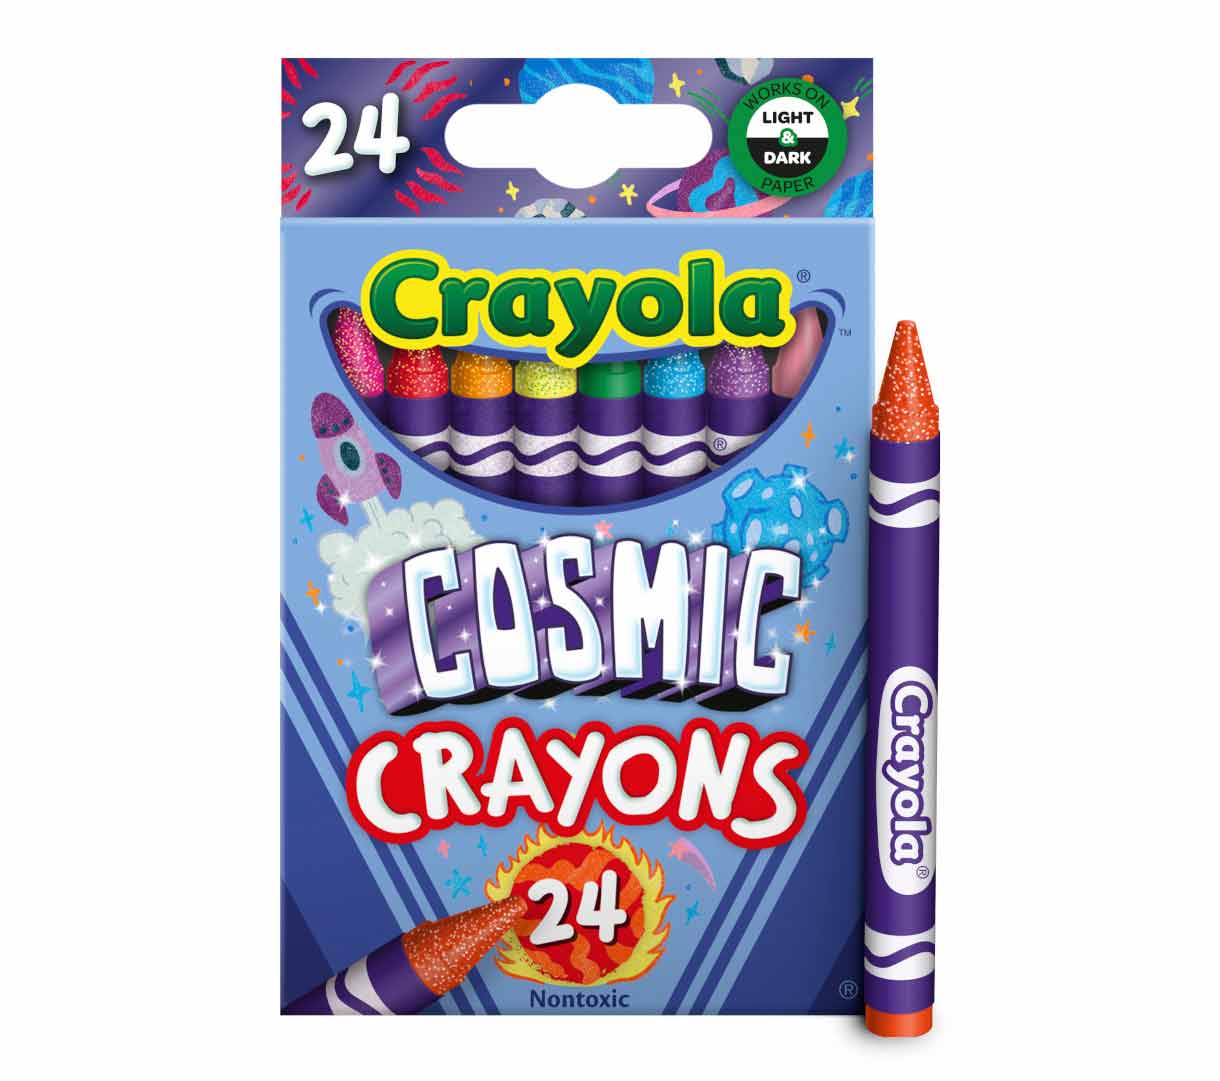 Crayola Classic Crayons School Supplies 24 Count (Pack of 3) 